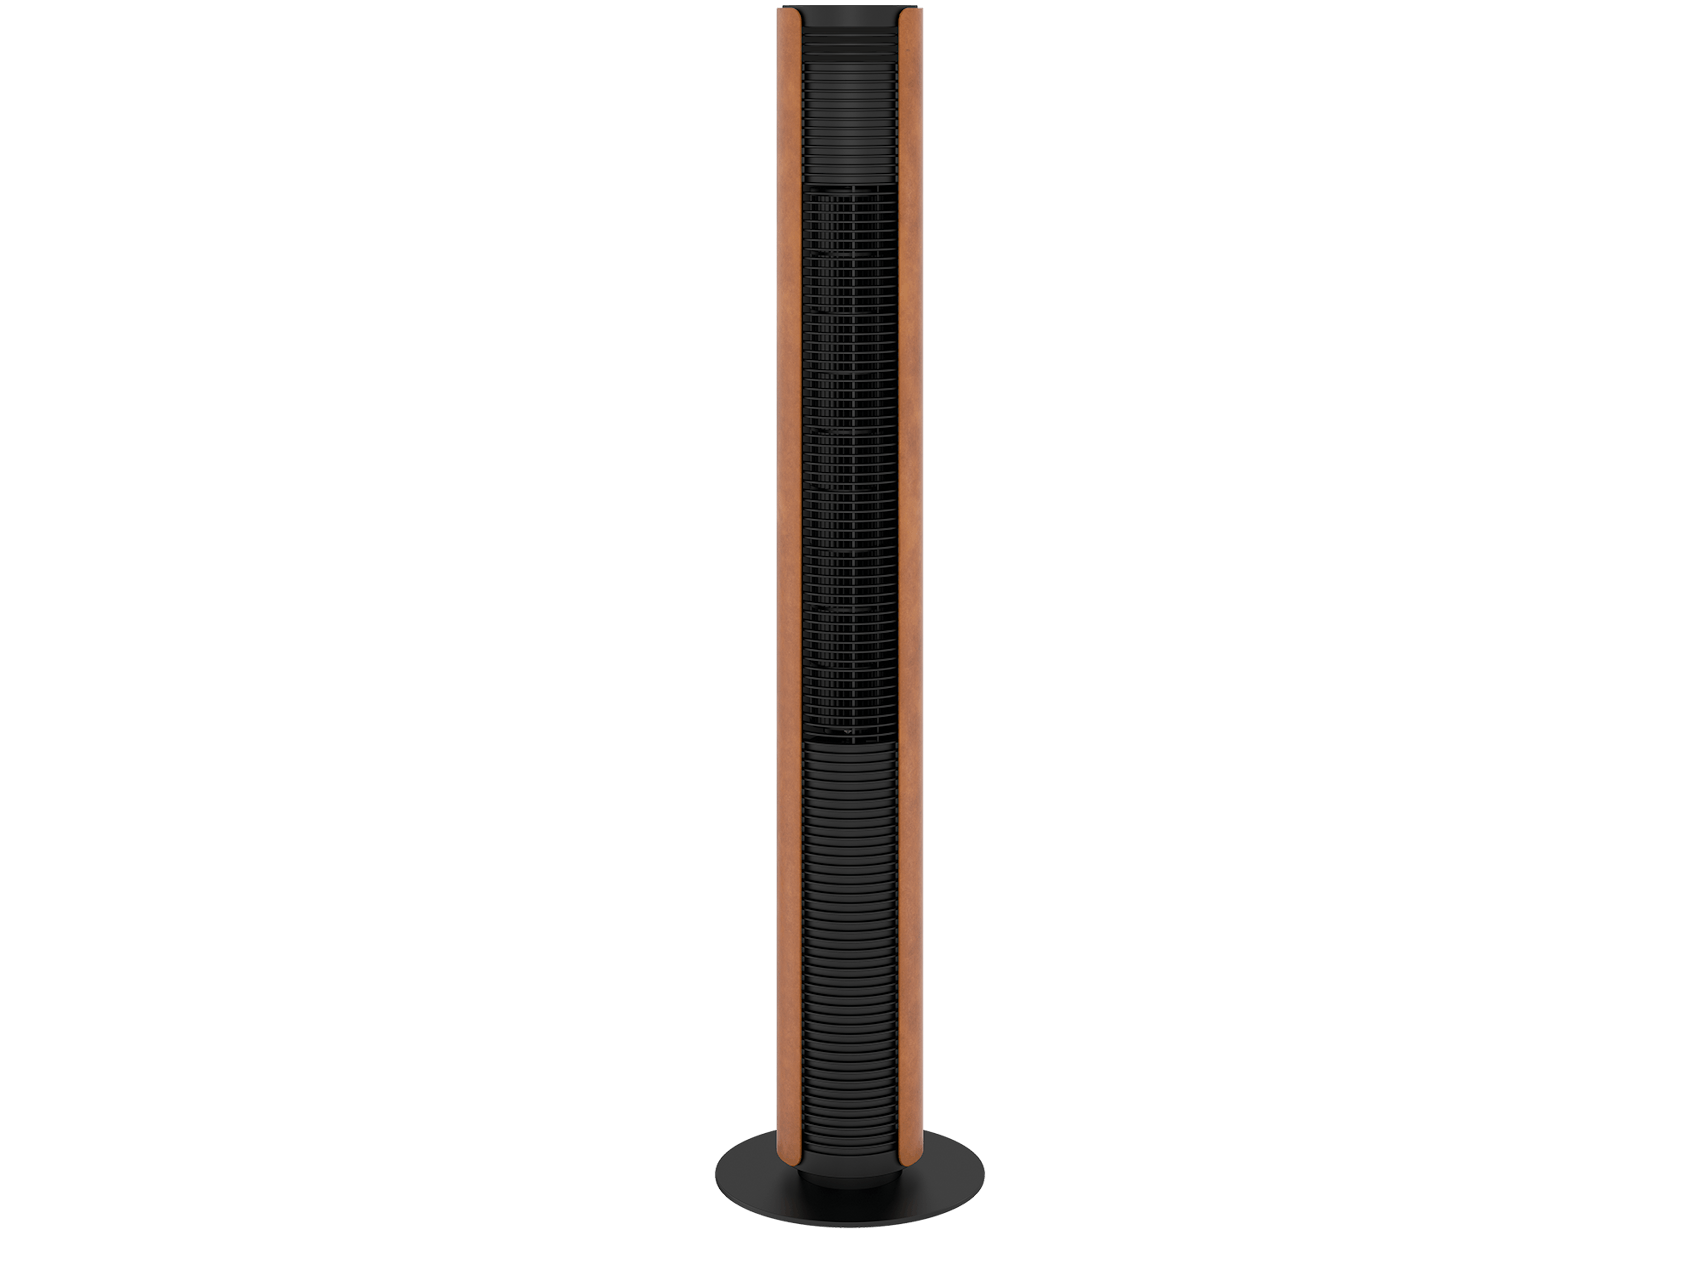 Peter leatherette tower fan by Stadler Form as front view